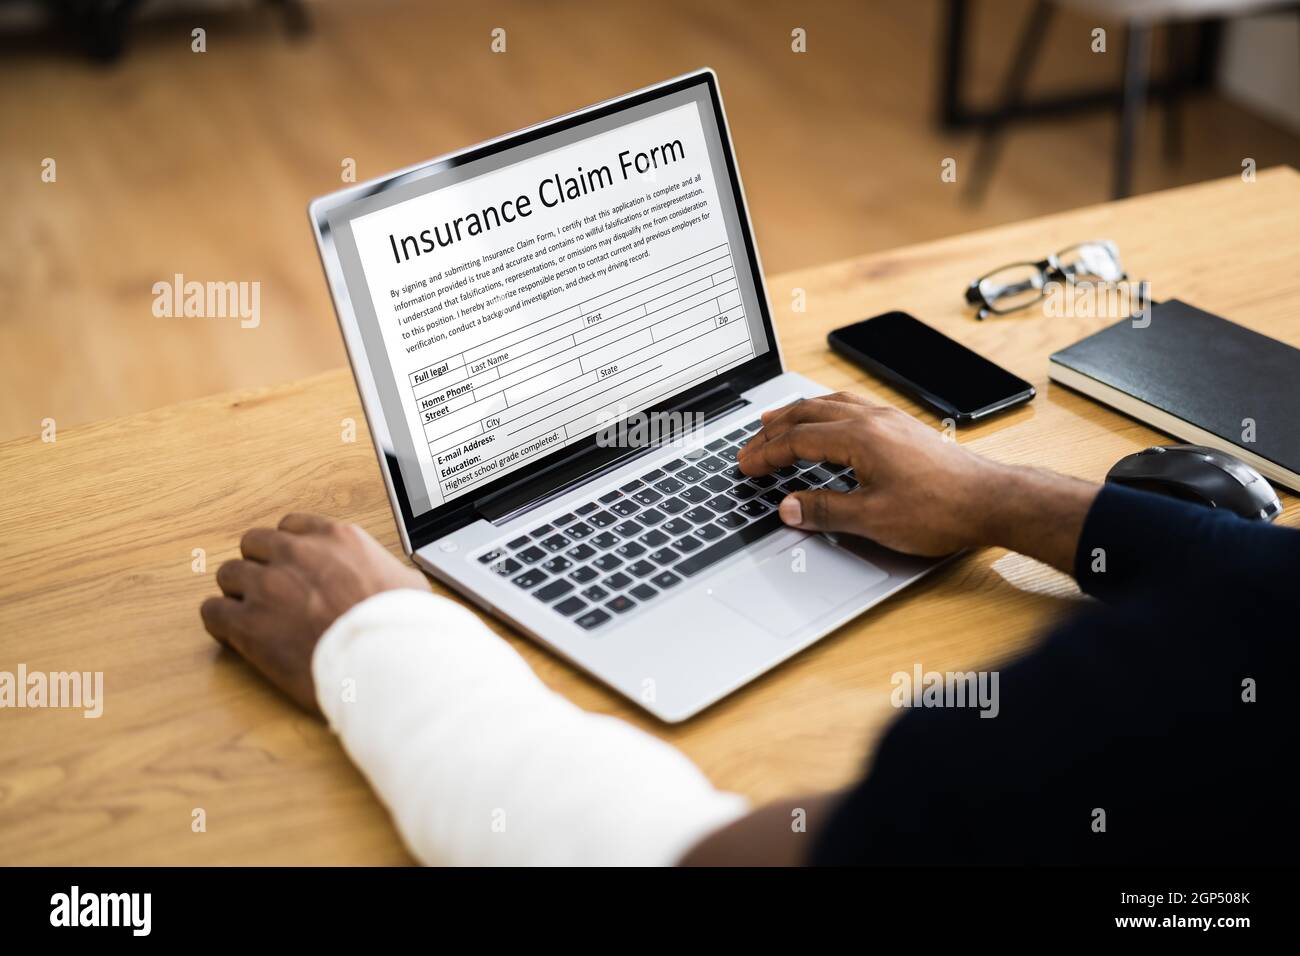 Broken Arm Injured Worker Compensation Coverage. Using Office Laptop Stock Photo